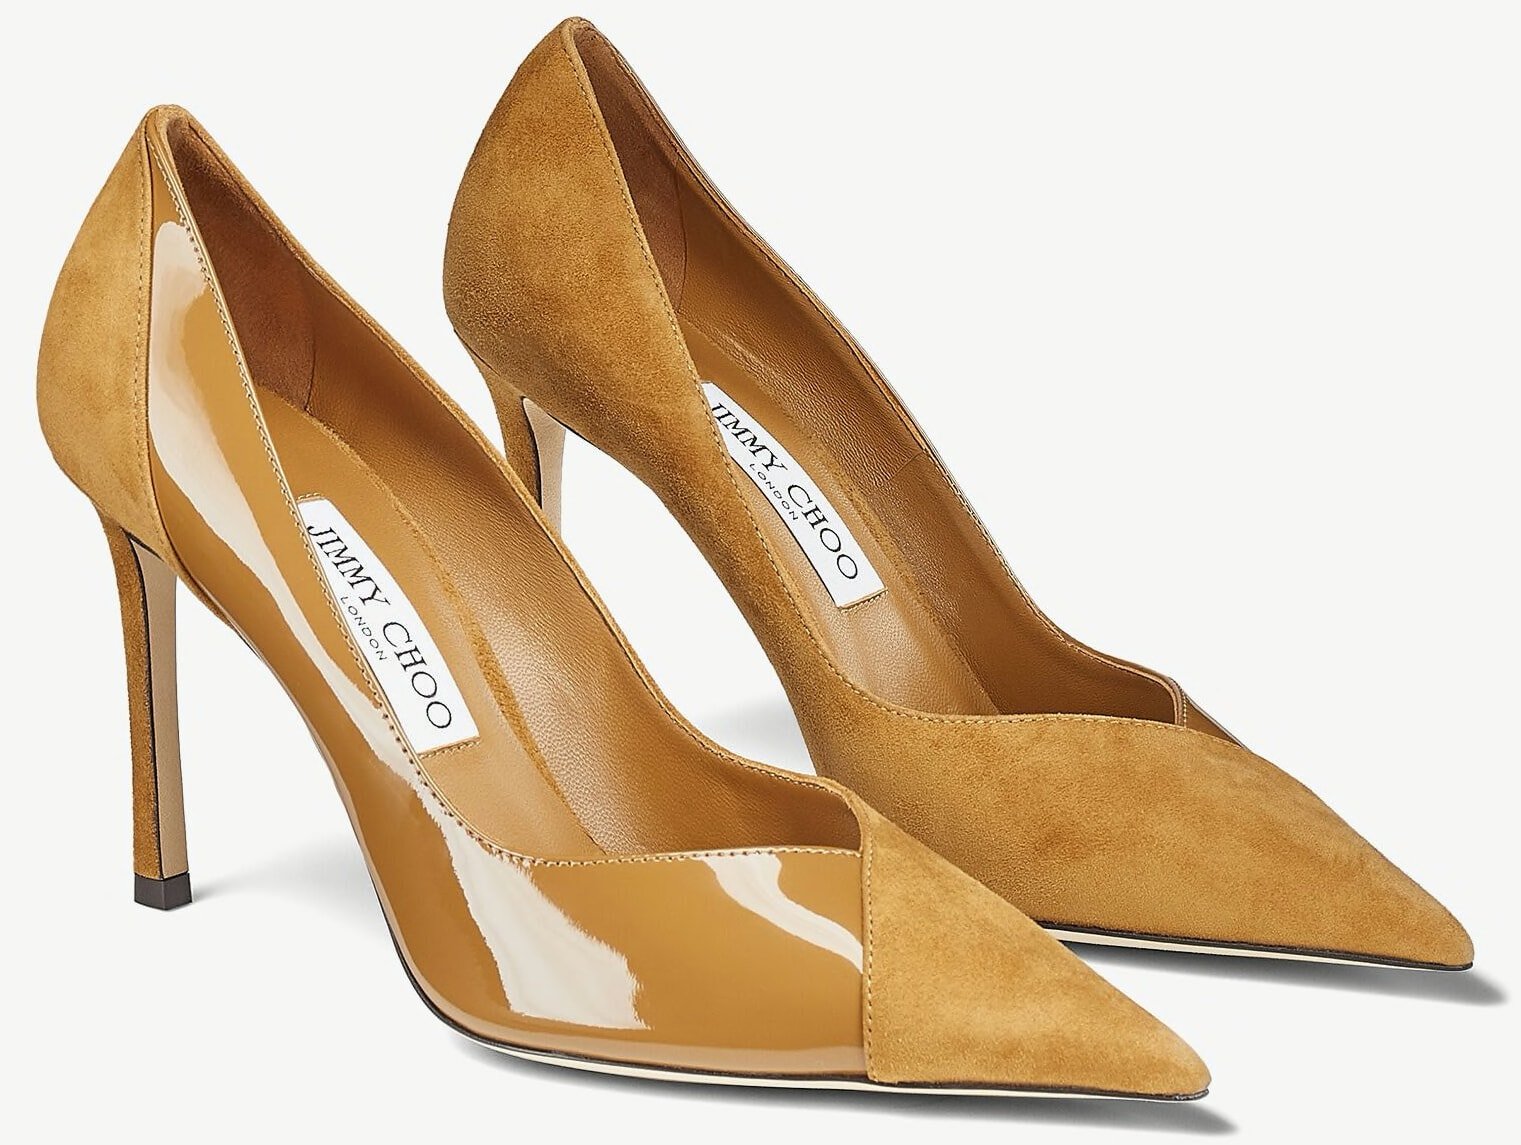 These Jimmy Choo pumps are done in an edgy combination of beige patent and suede materials